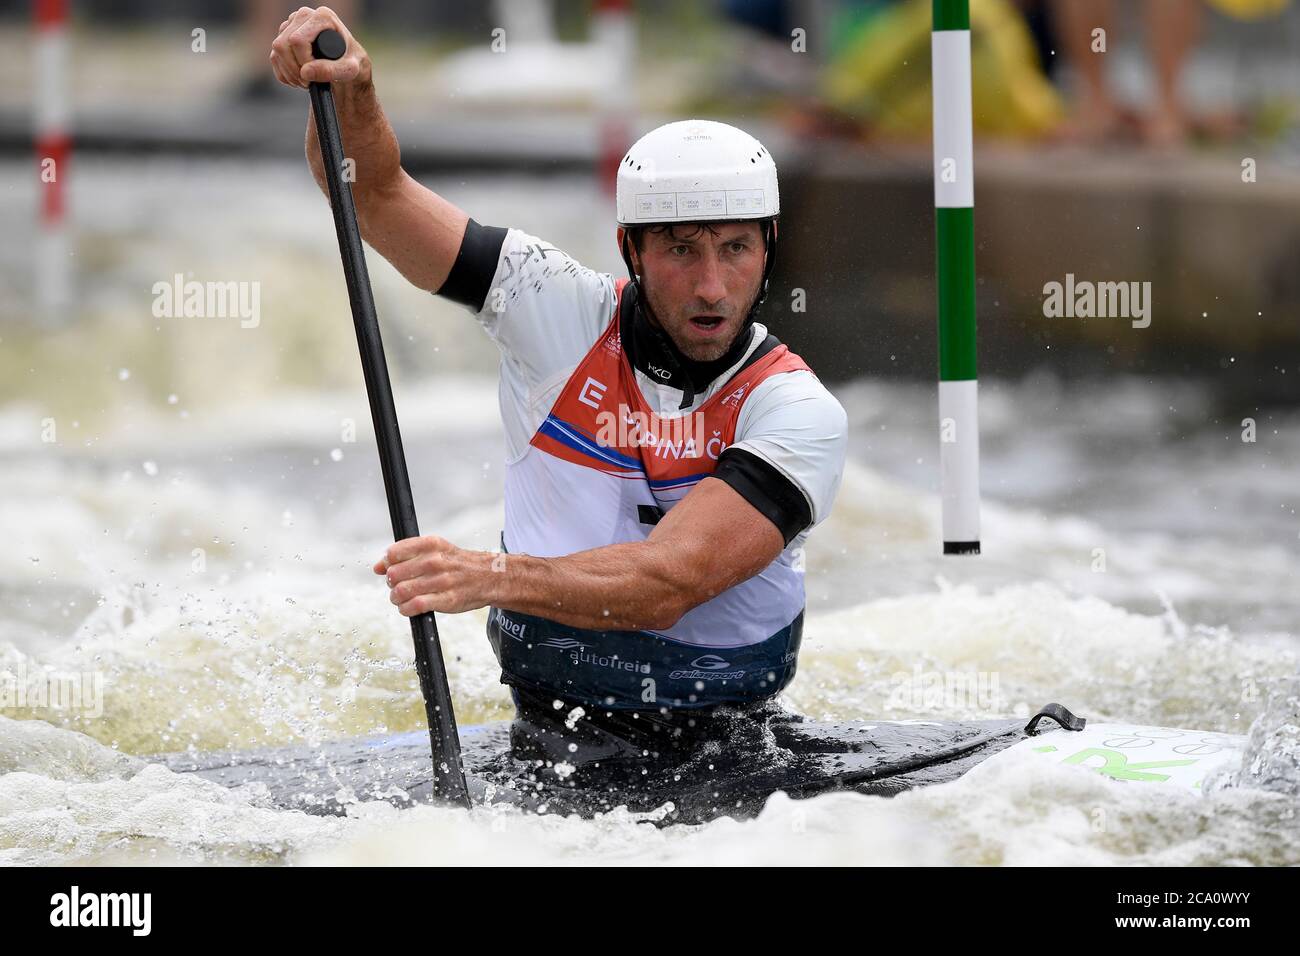 Prague, Czech Republic. 02nd Aug, 2020. Vitezslav Gebas of Czech Republic competes in the men's C-1 canoe slalom final at the Czech Cup in Prague-Troja, Czech Republic, August 2, 2020. Vitezslav Gebas, 36 years old Czech canoeist, ended his career. Four years ago in Rio de Janeiro, the canoeist had a medal from the canoe race within reach, finishing fourth with a loss of 13 hundredths of a second to the bronze position. Credit: Ondrej Deml/CTK Photo/Alamy Live News Stock Photo